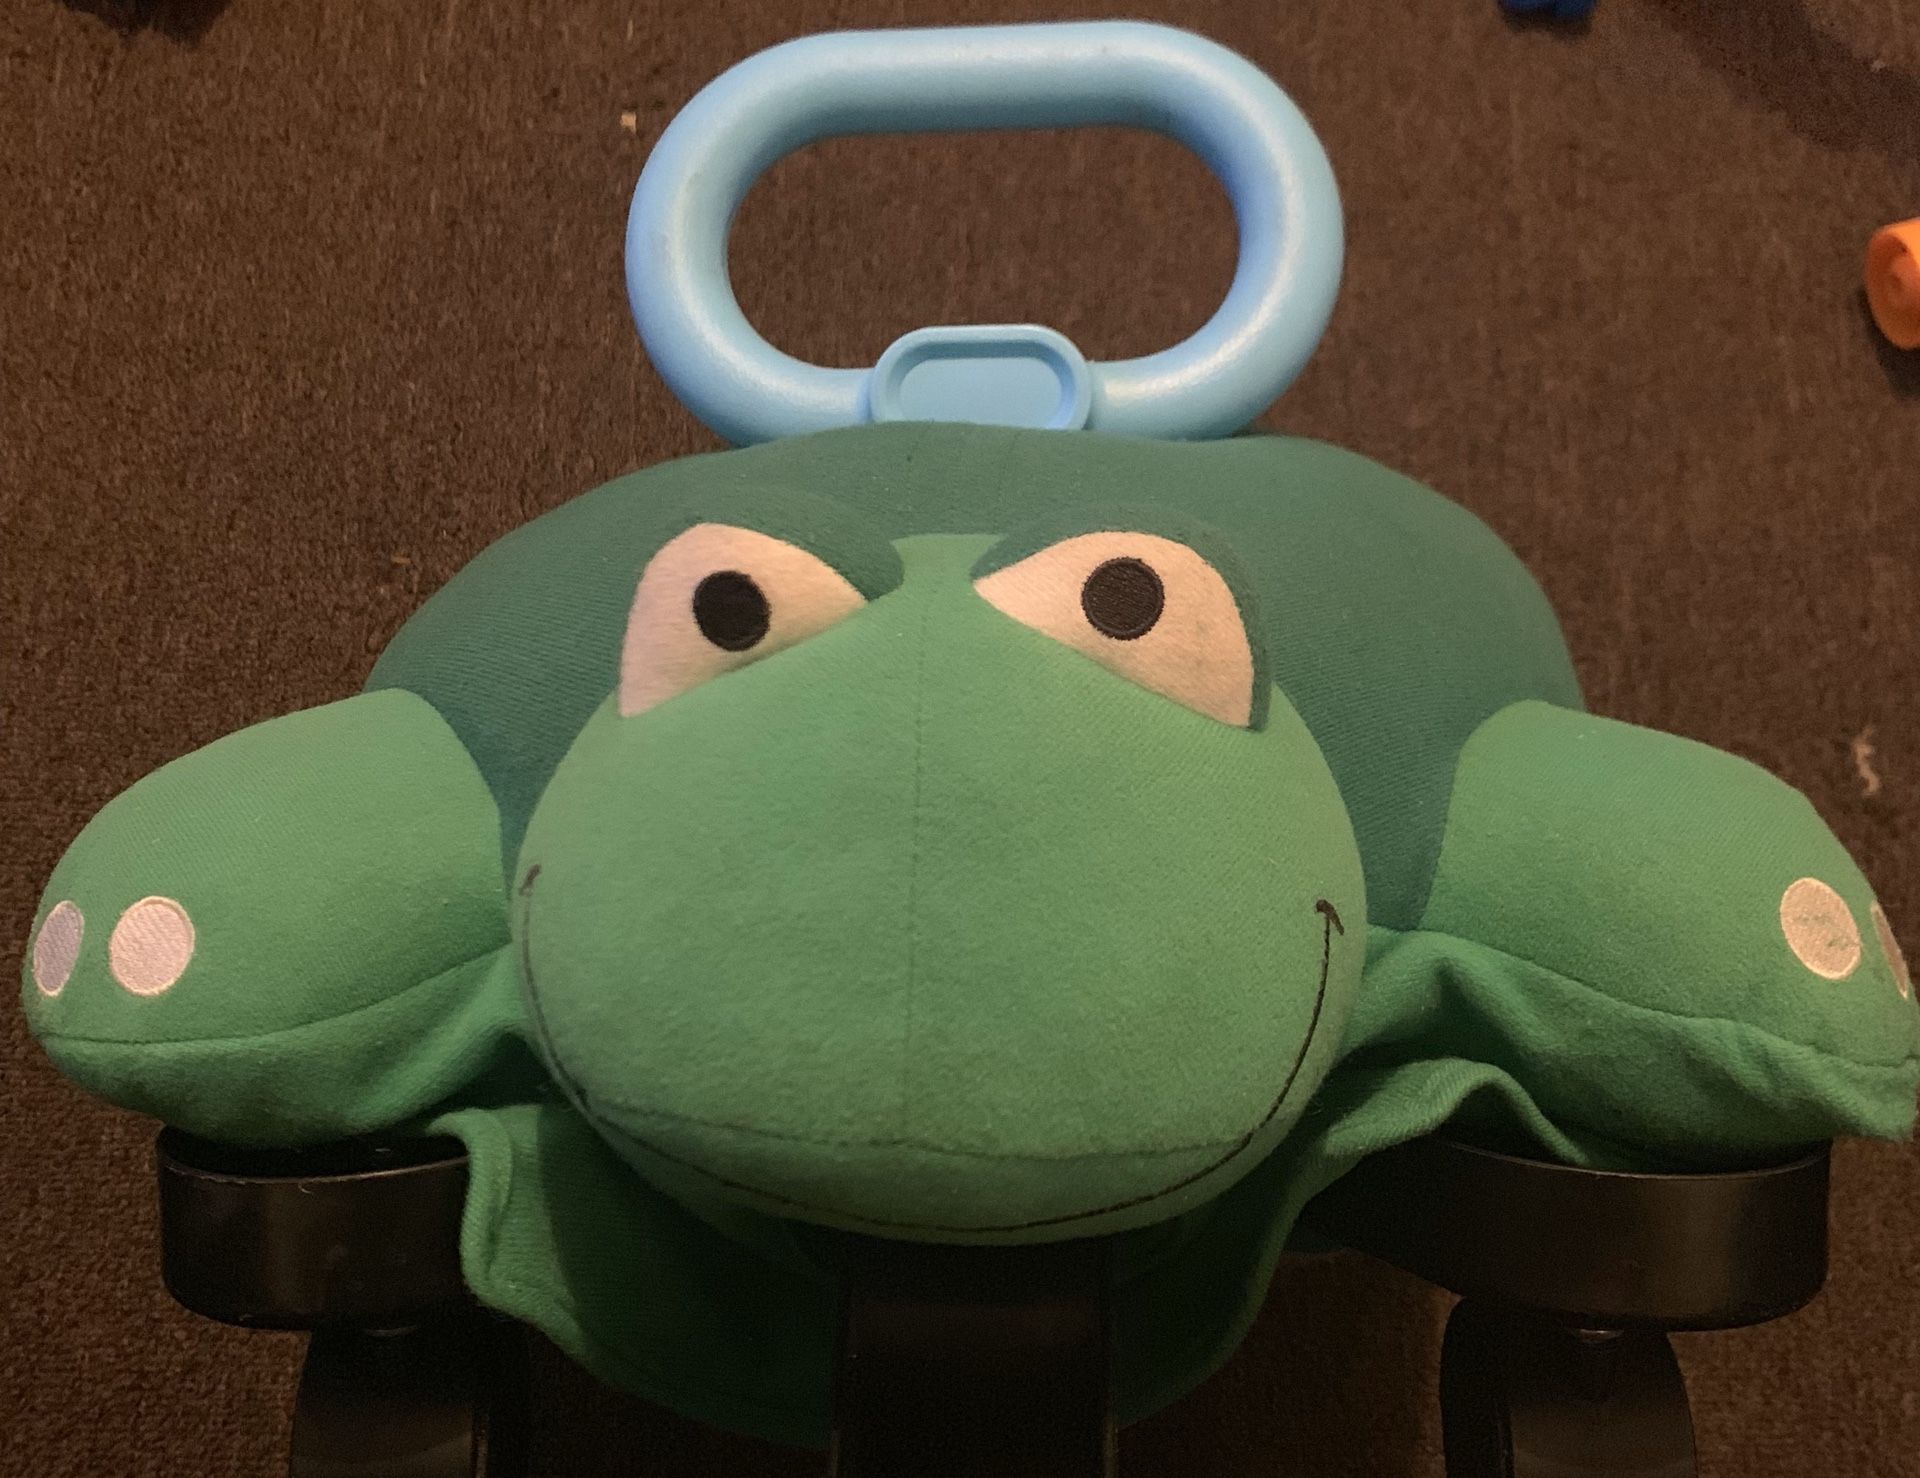 Little tikes pillow racer rolling turtle